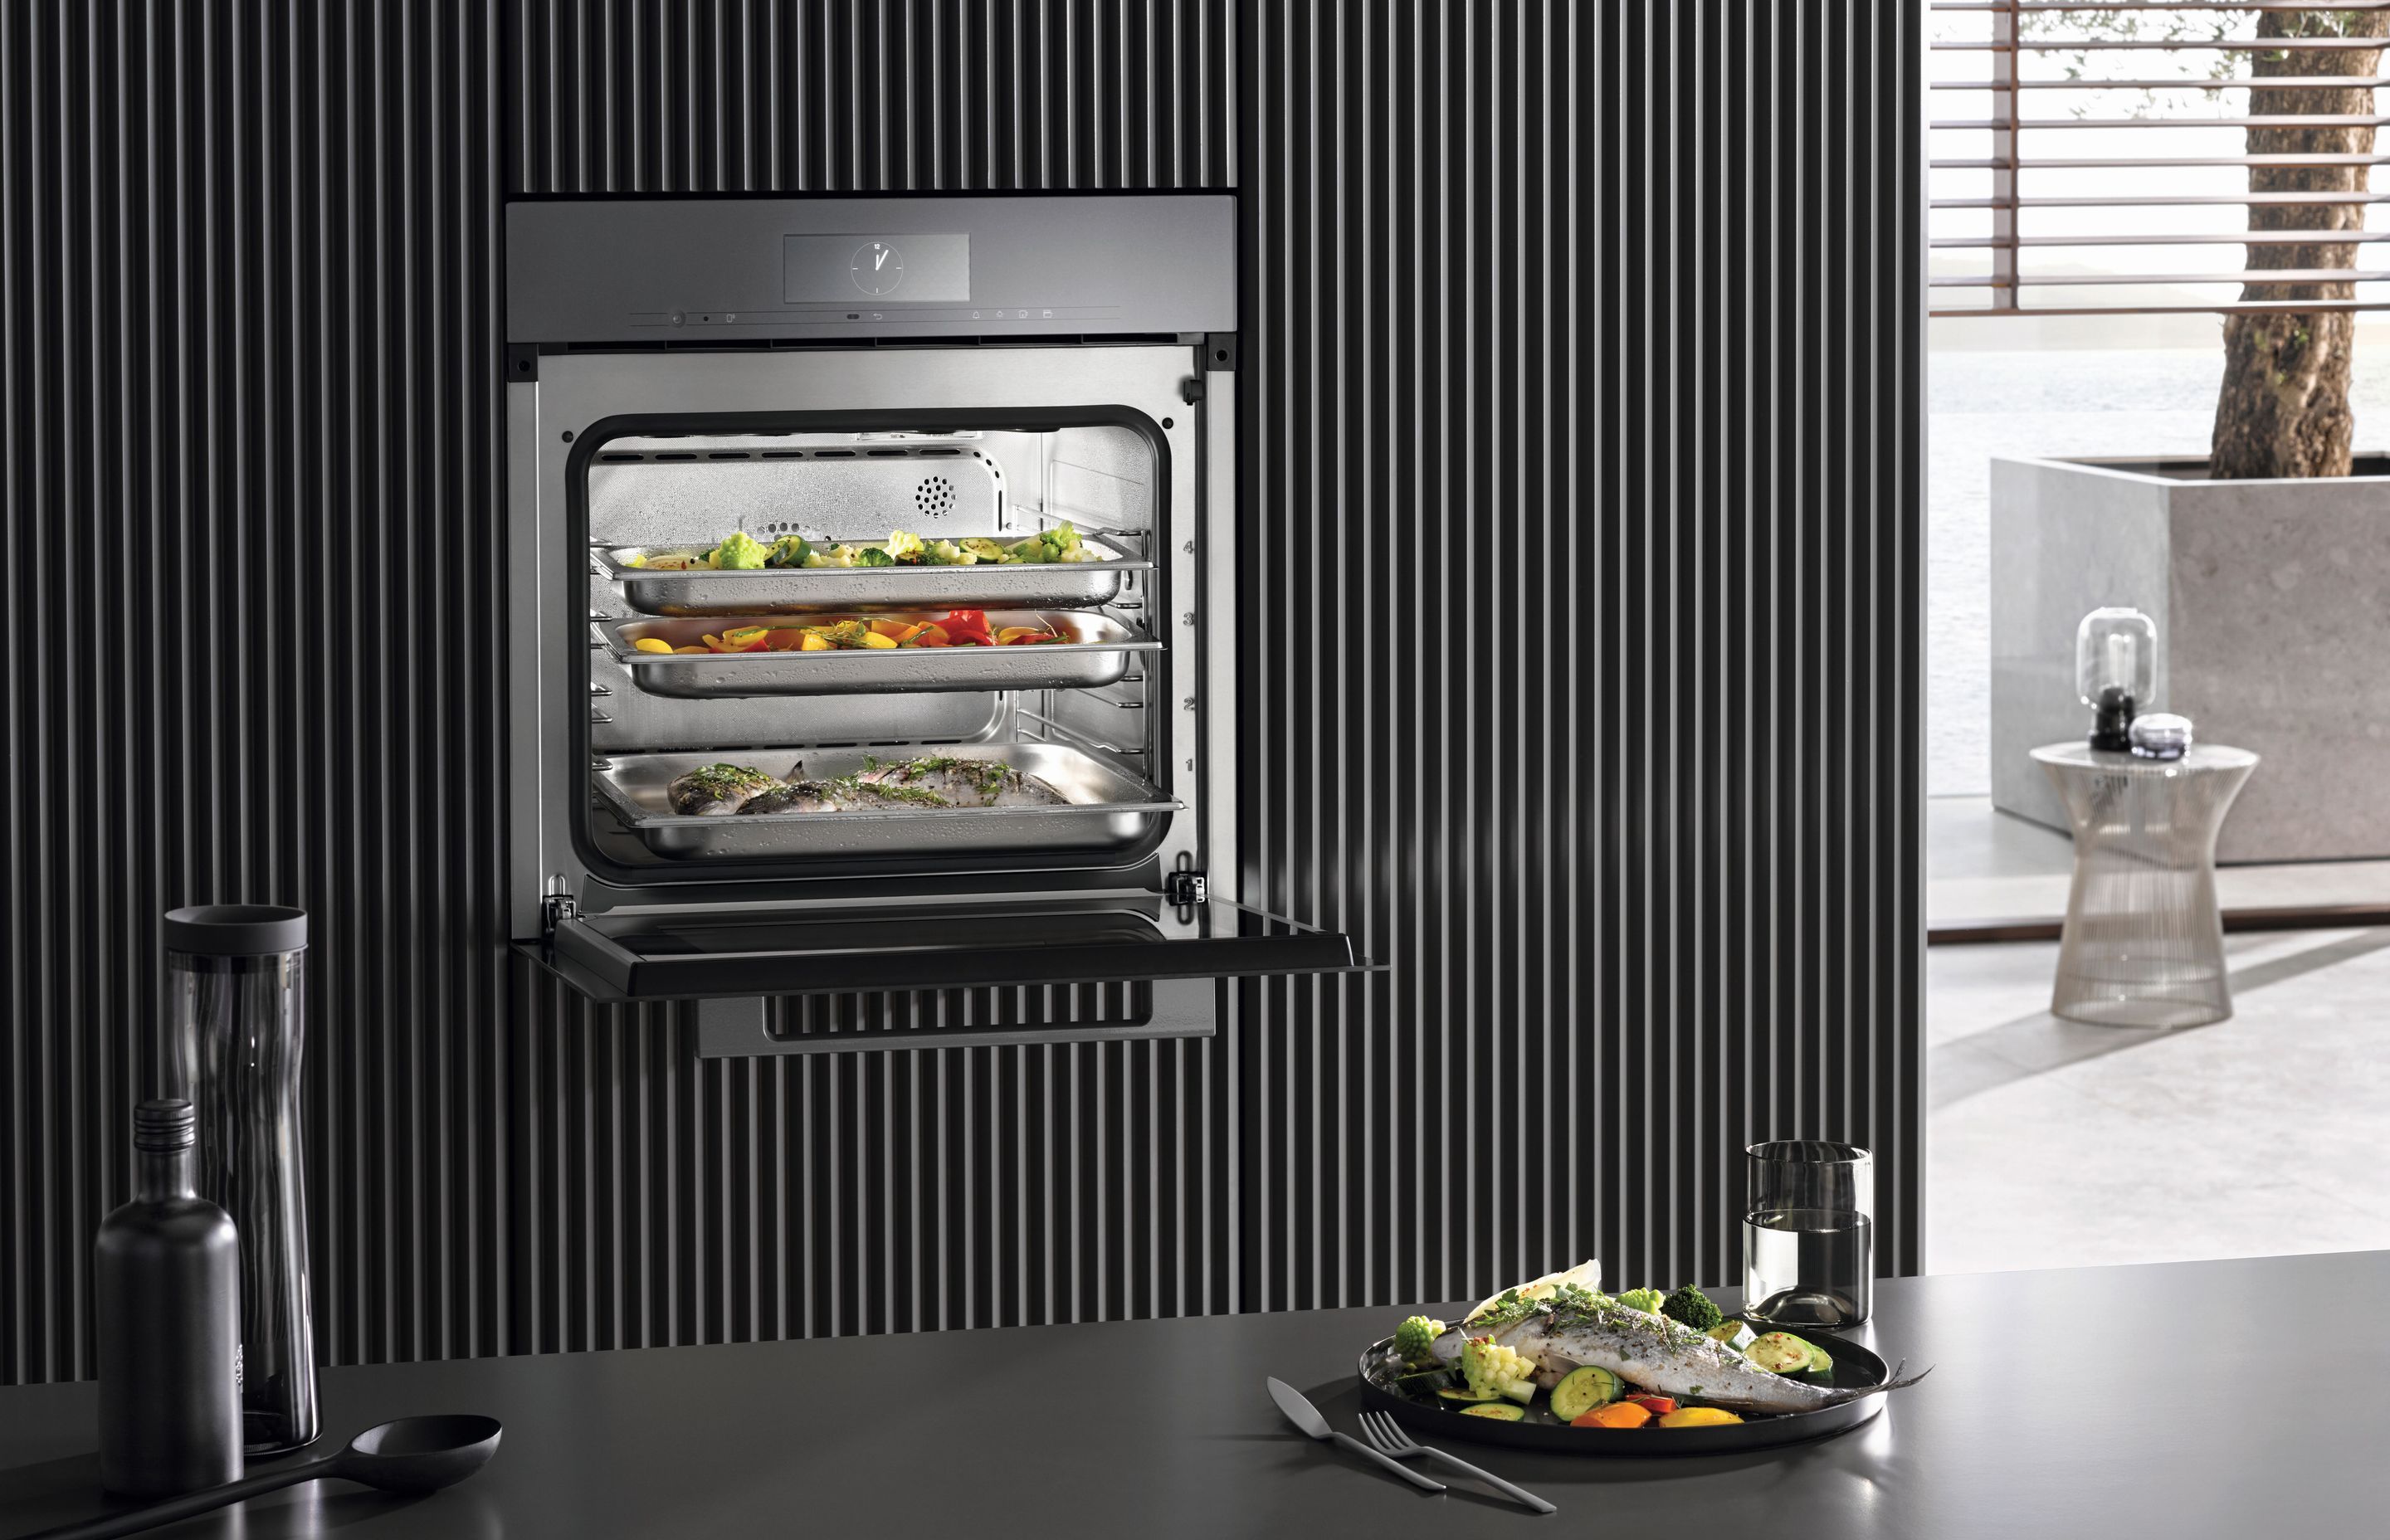 A steam oven is ideal for perfectly cooked fresh veges and fish.